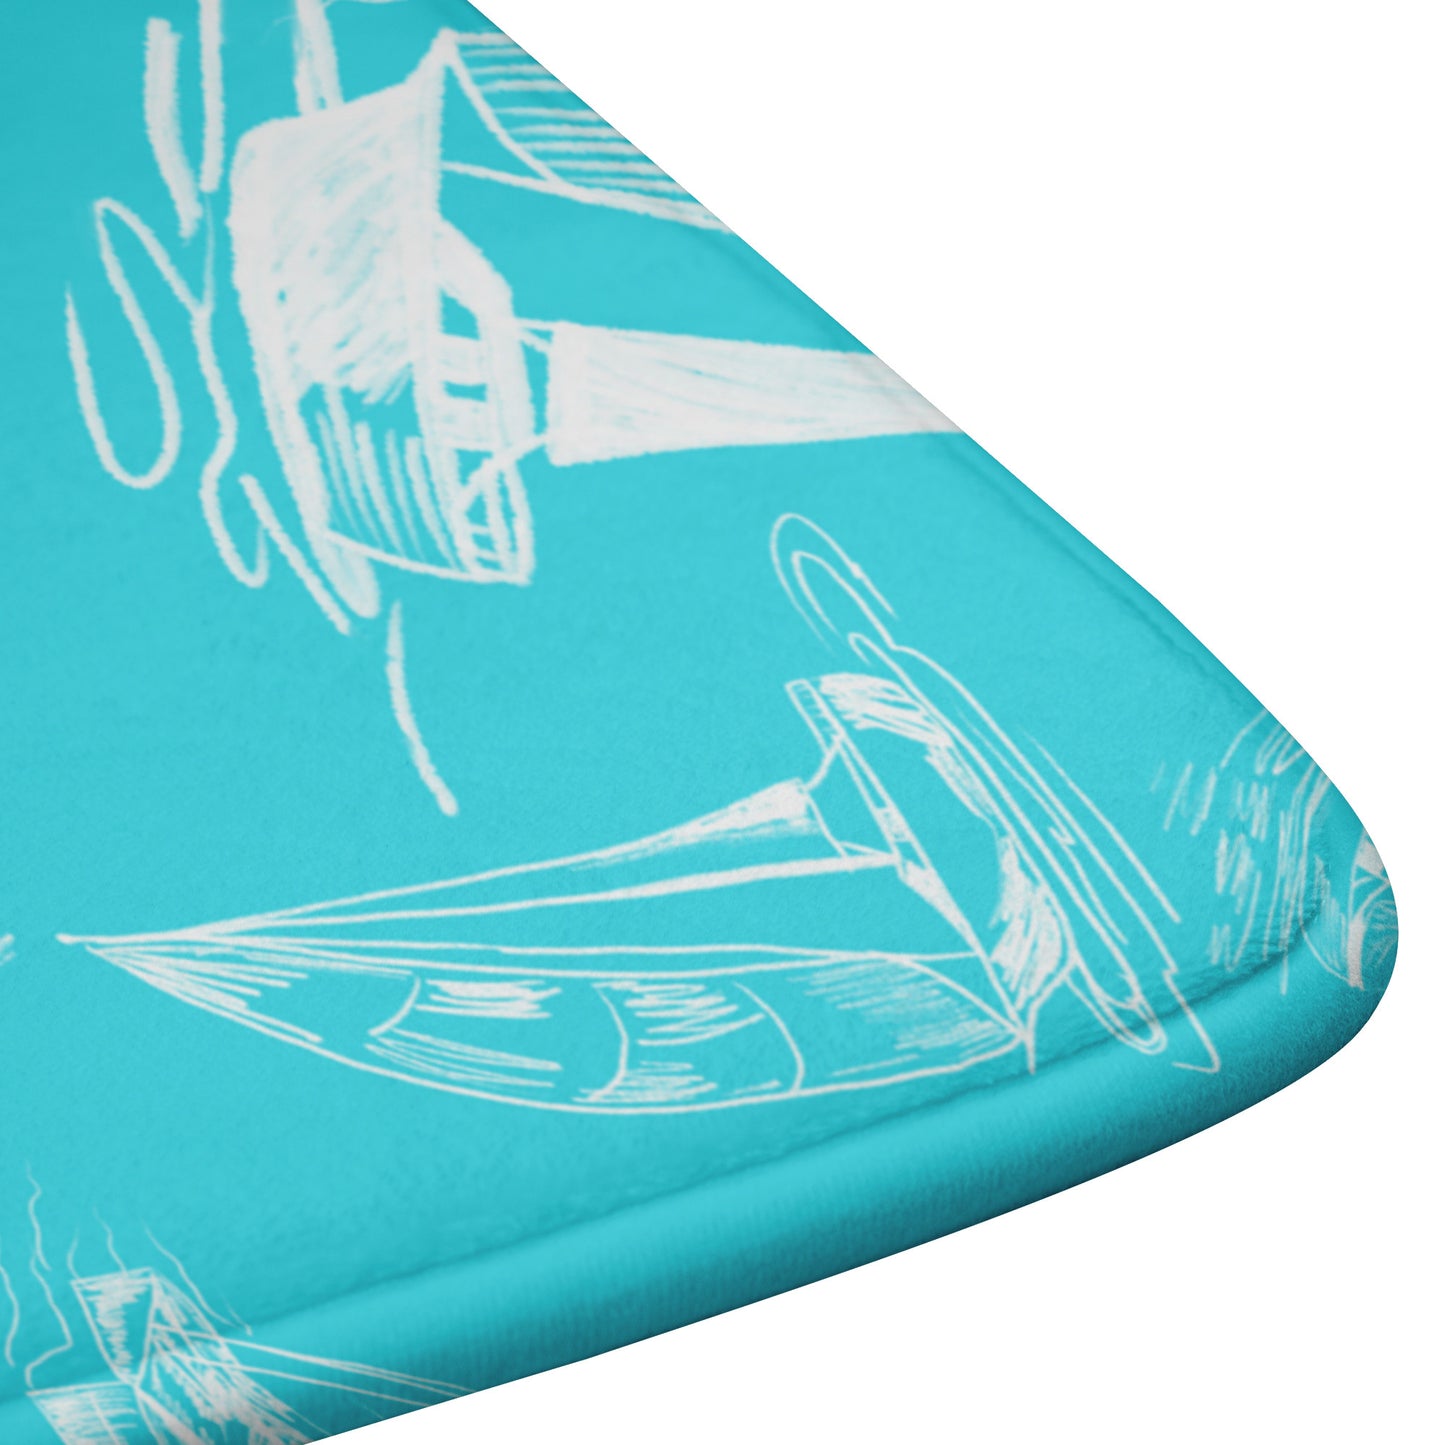 Sailboat Sketches on Tropical Blue Background, Bath Mats